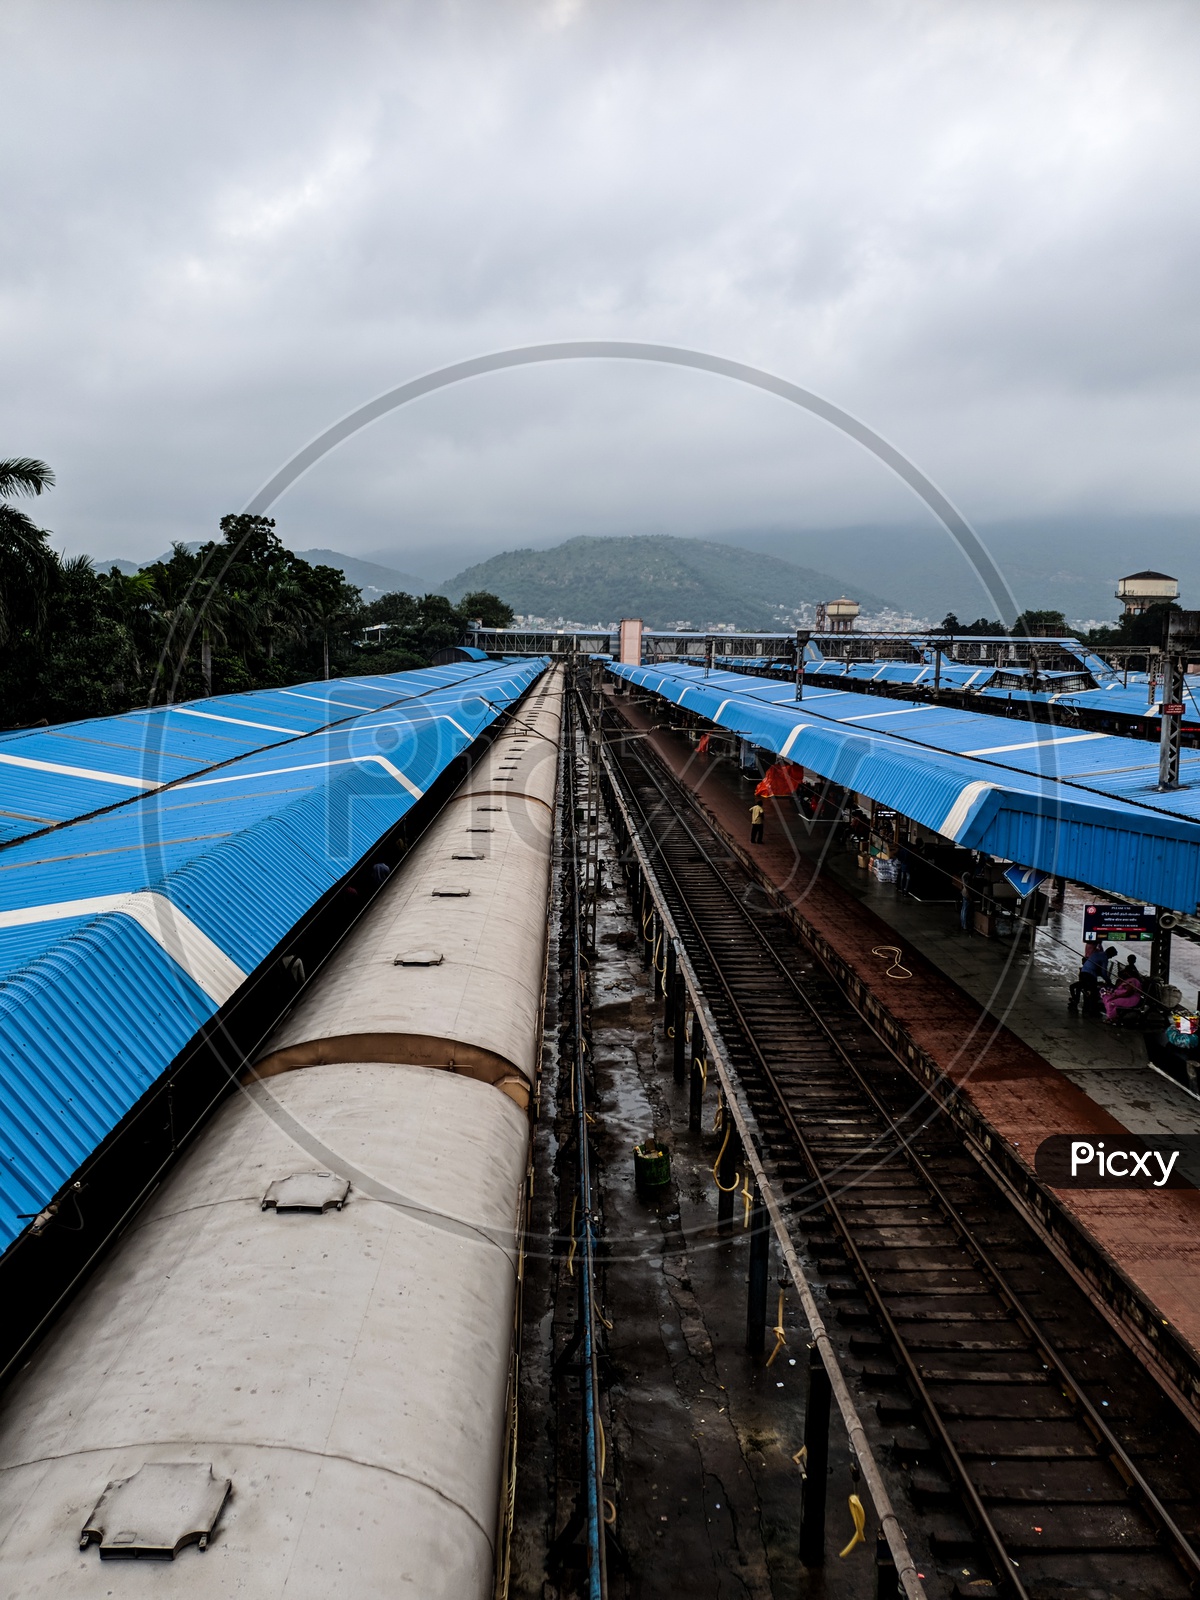 Visakhapatnam Railway Station on a cloudy evening